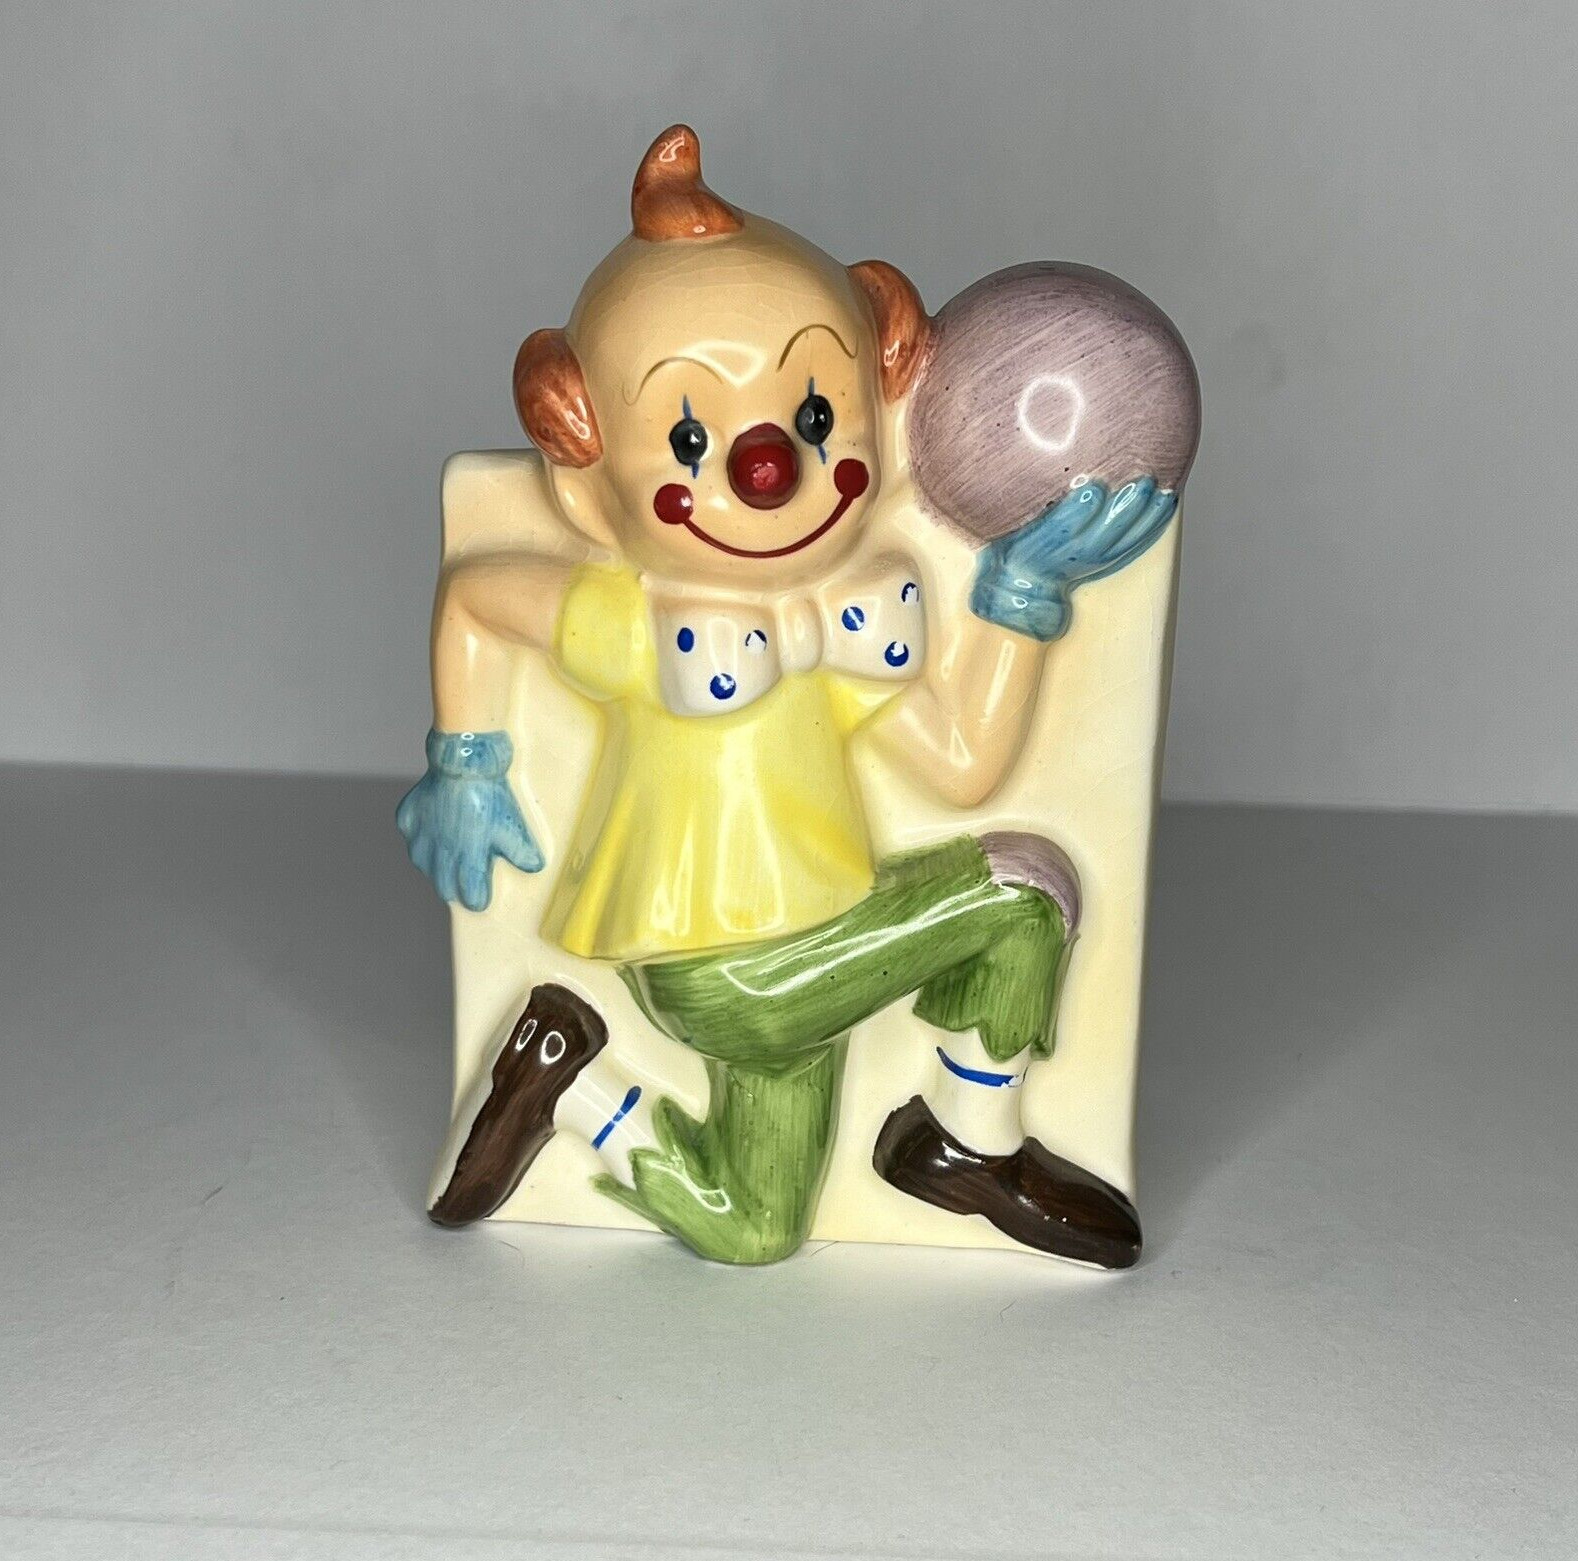 Vintage Made In Japan Ceramic Planter Clown with Ball Circus Succulents Nursery